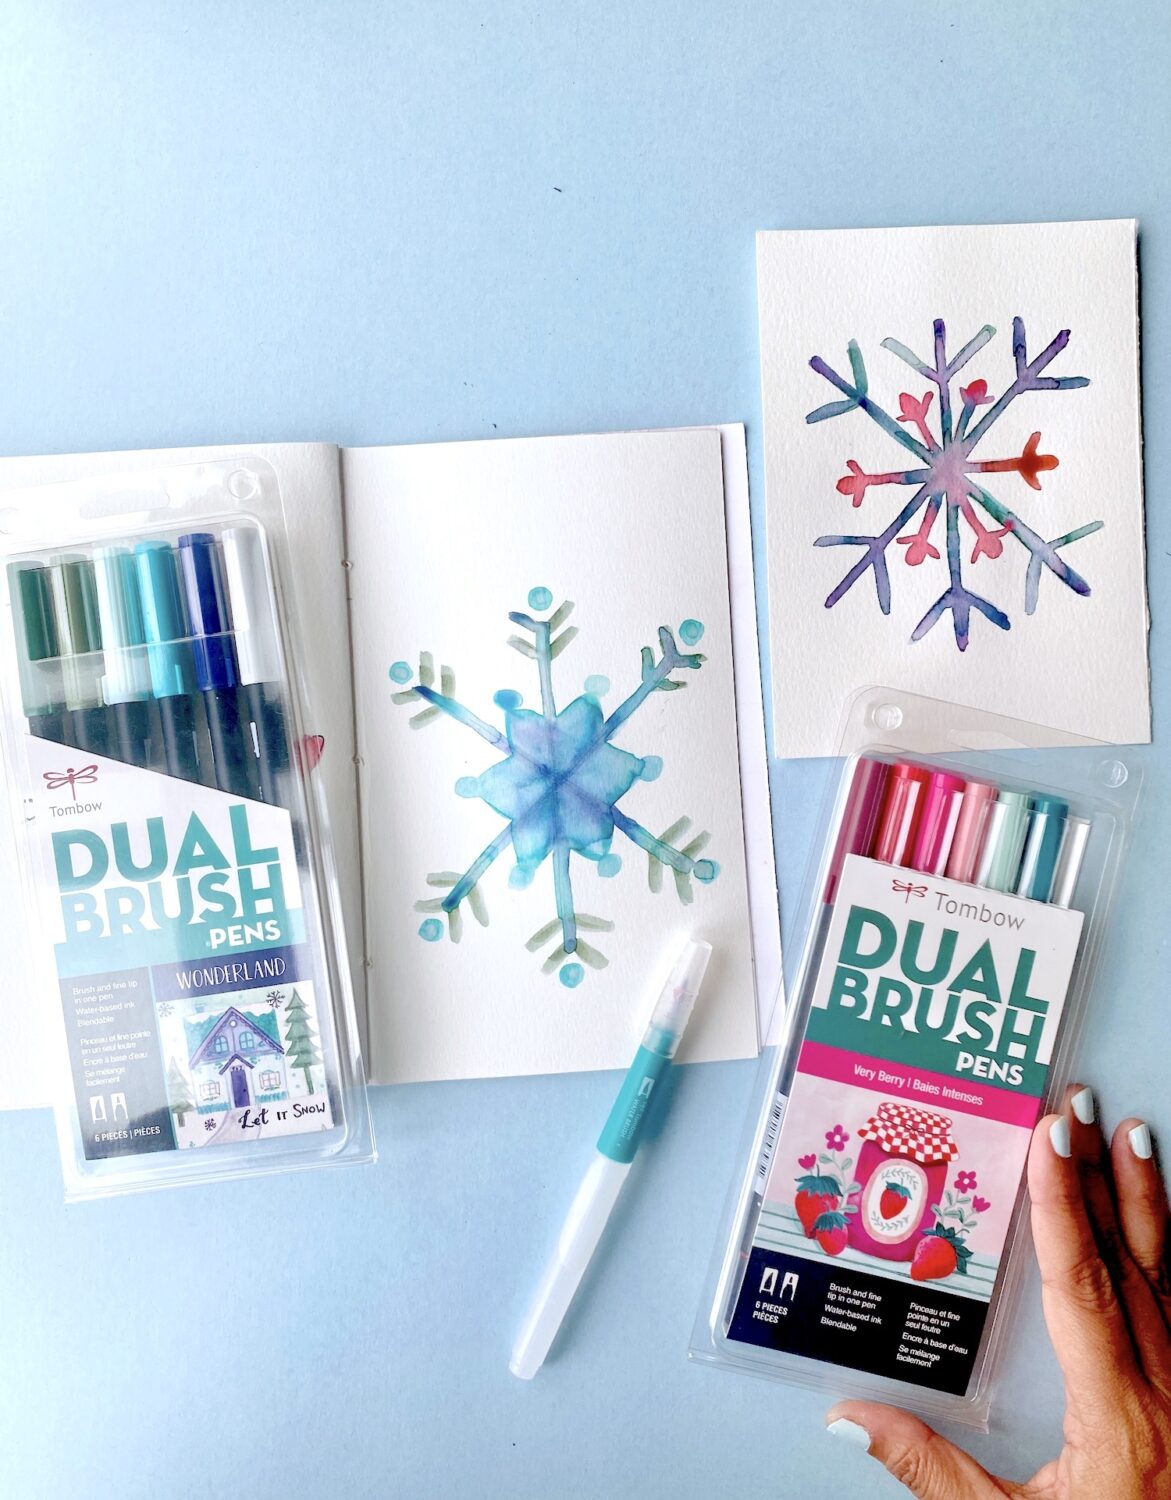 Watercolor Snowflake Tutorial - finished snowflake illustrations